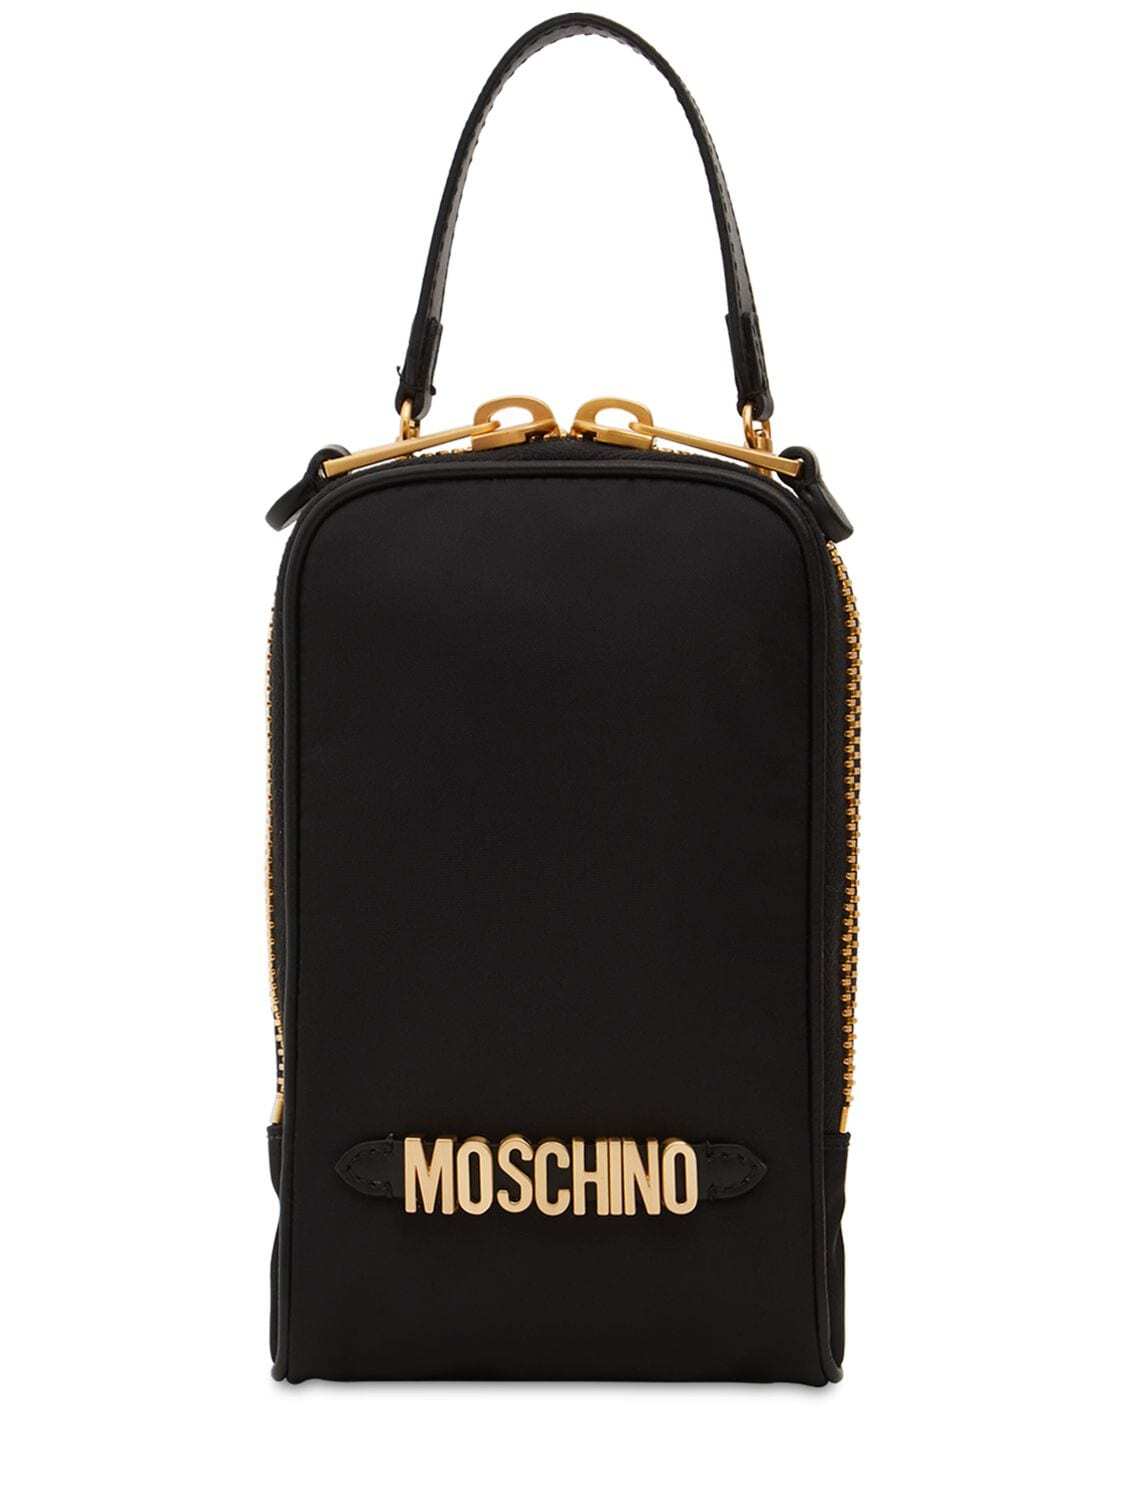 MOSCHINO Logo Lettering Top Handle Bag in black